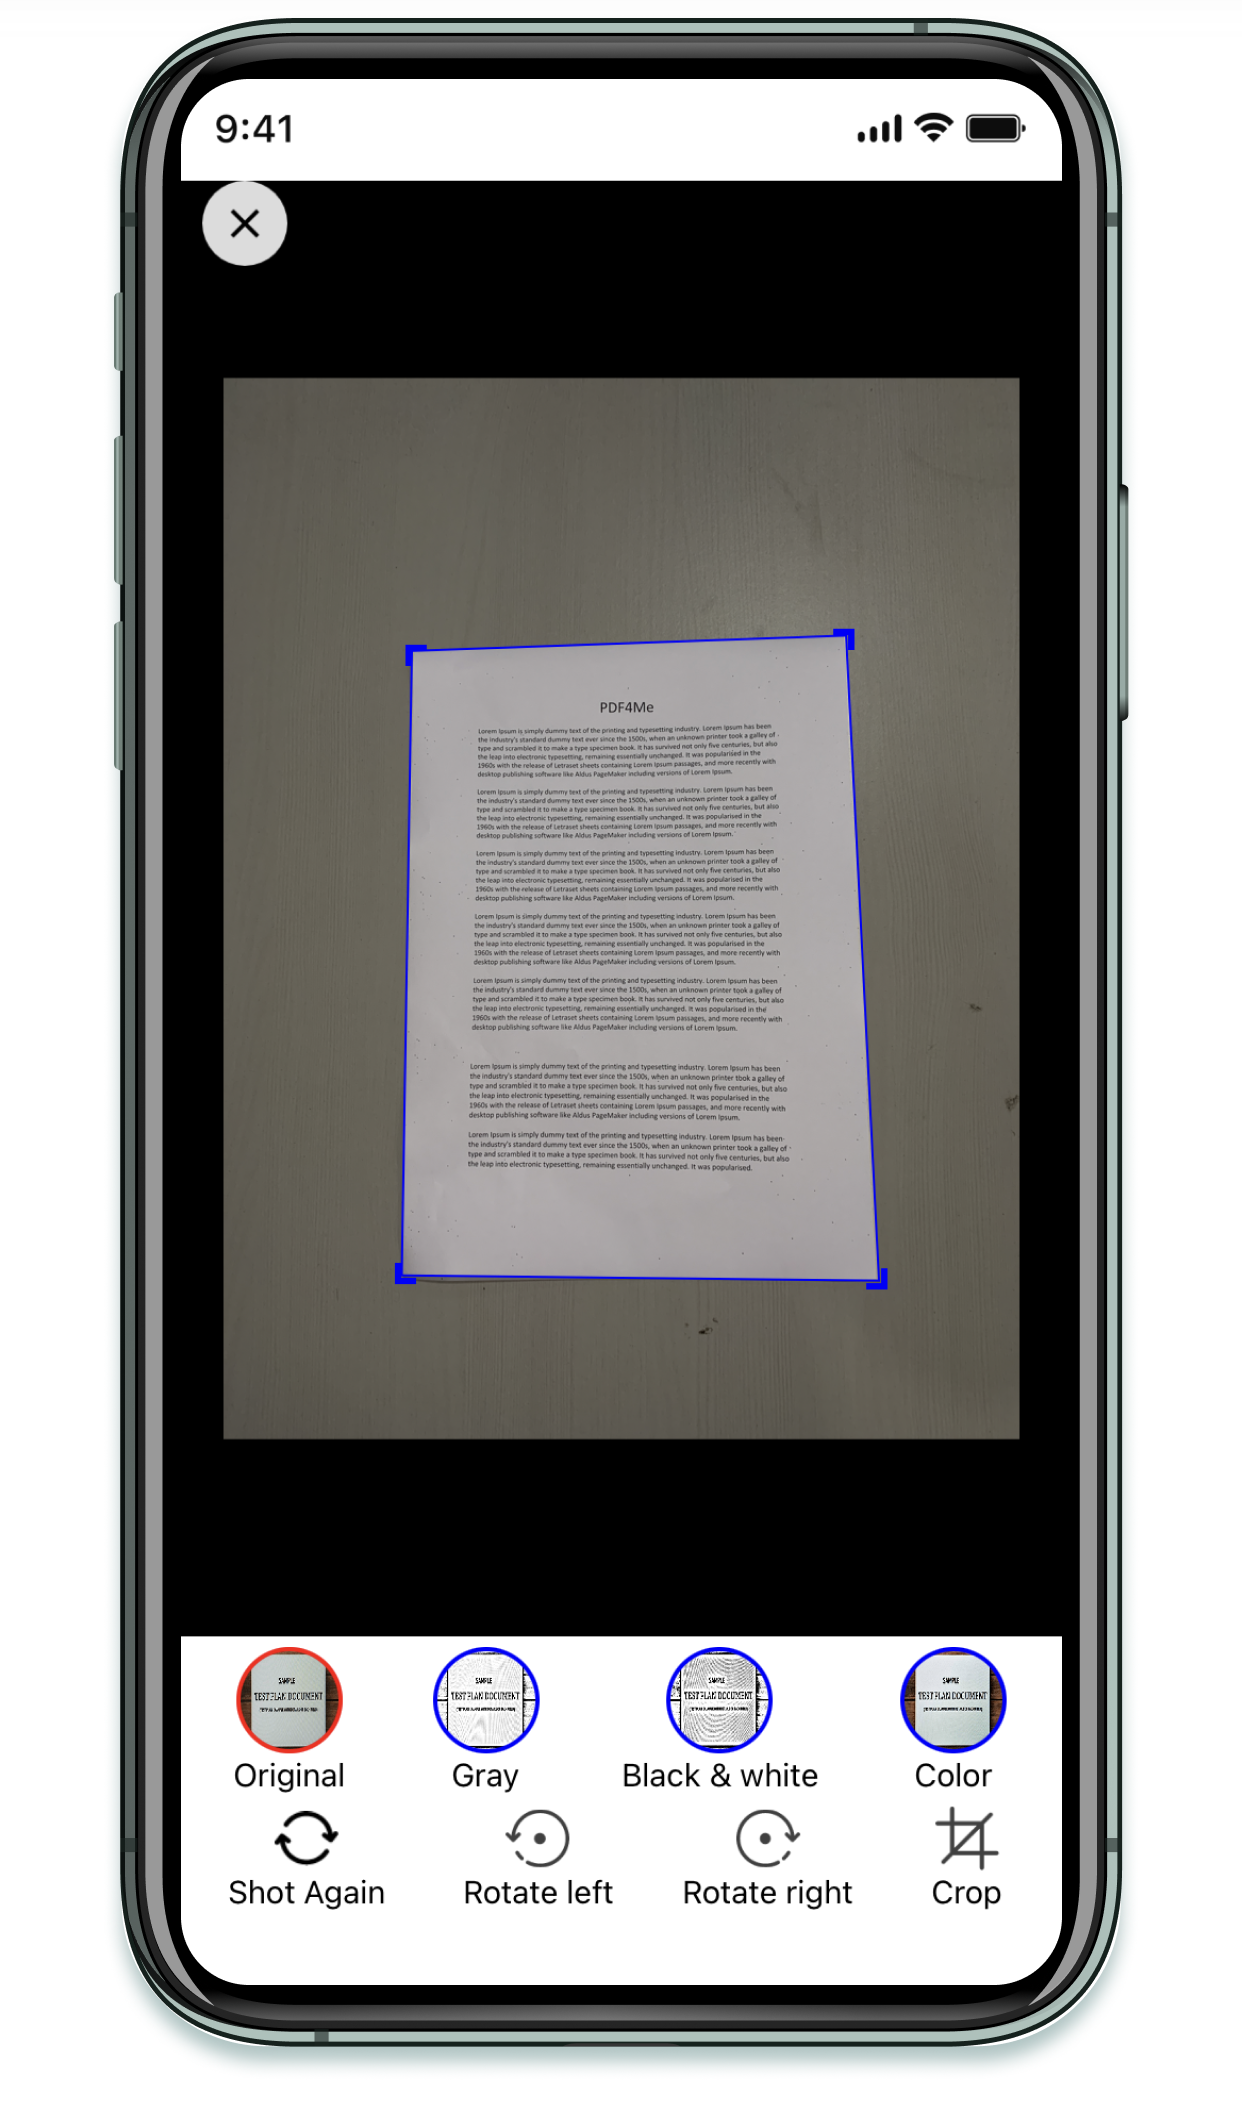 PDF4me Scan & Automation app for iOS